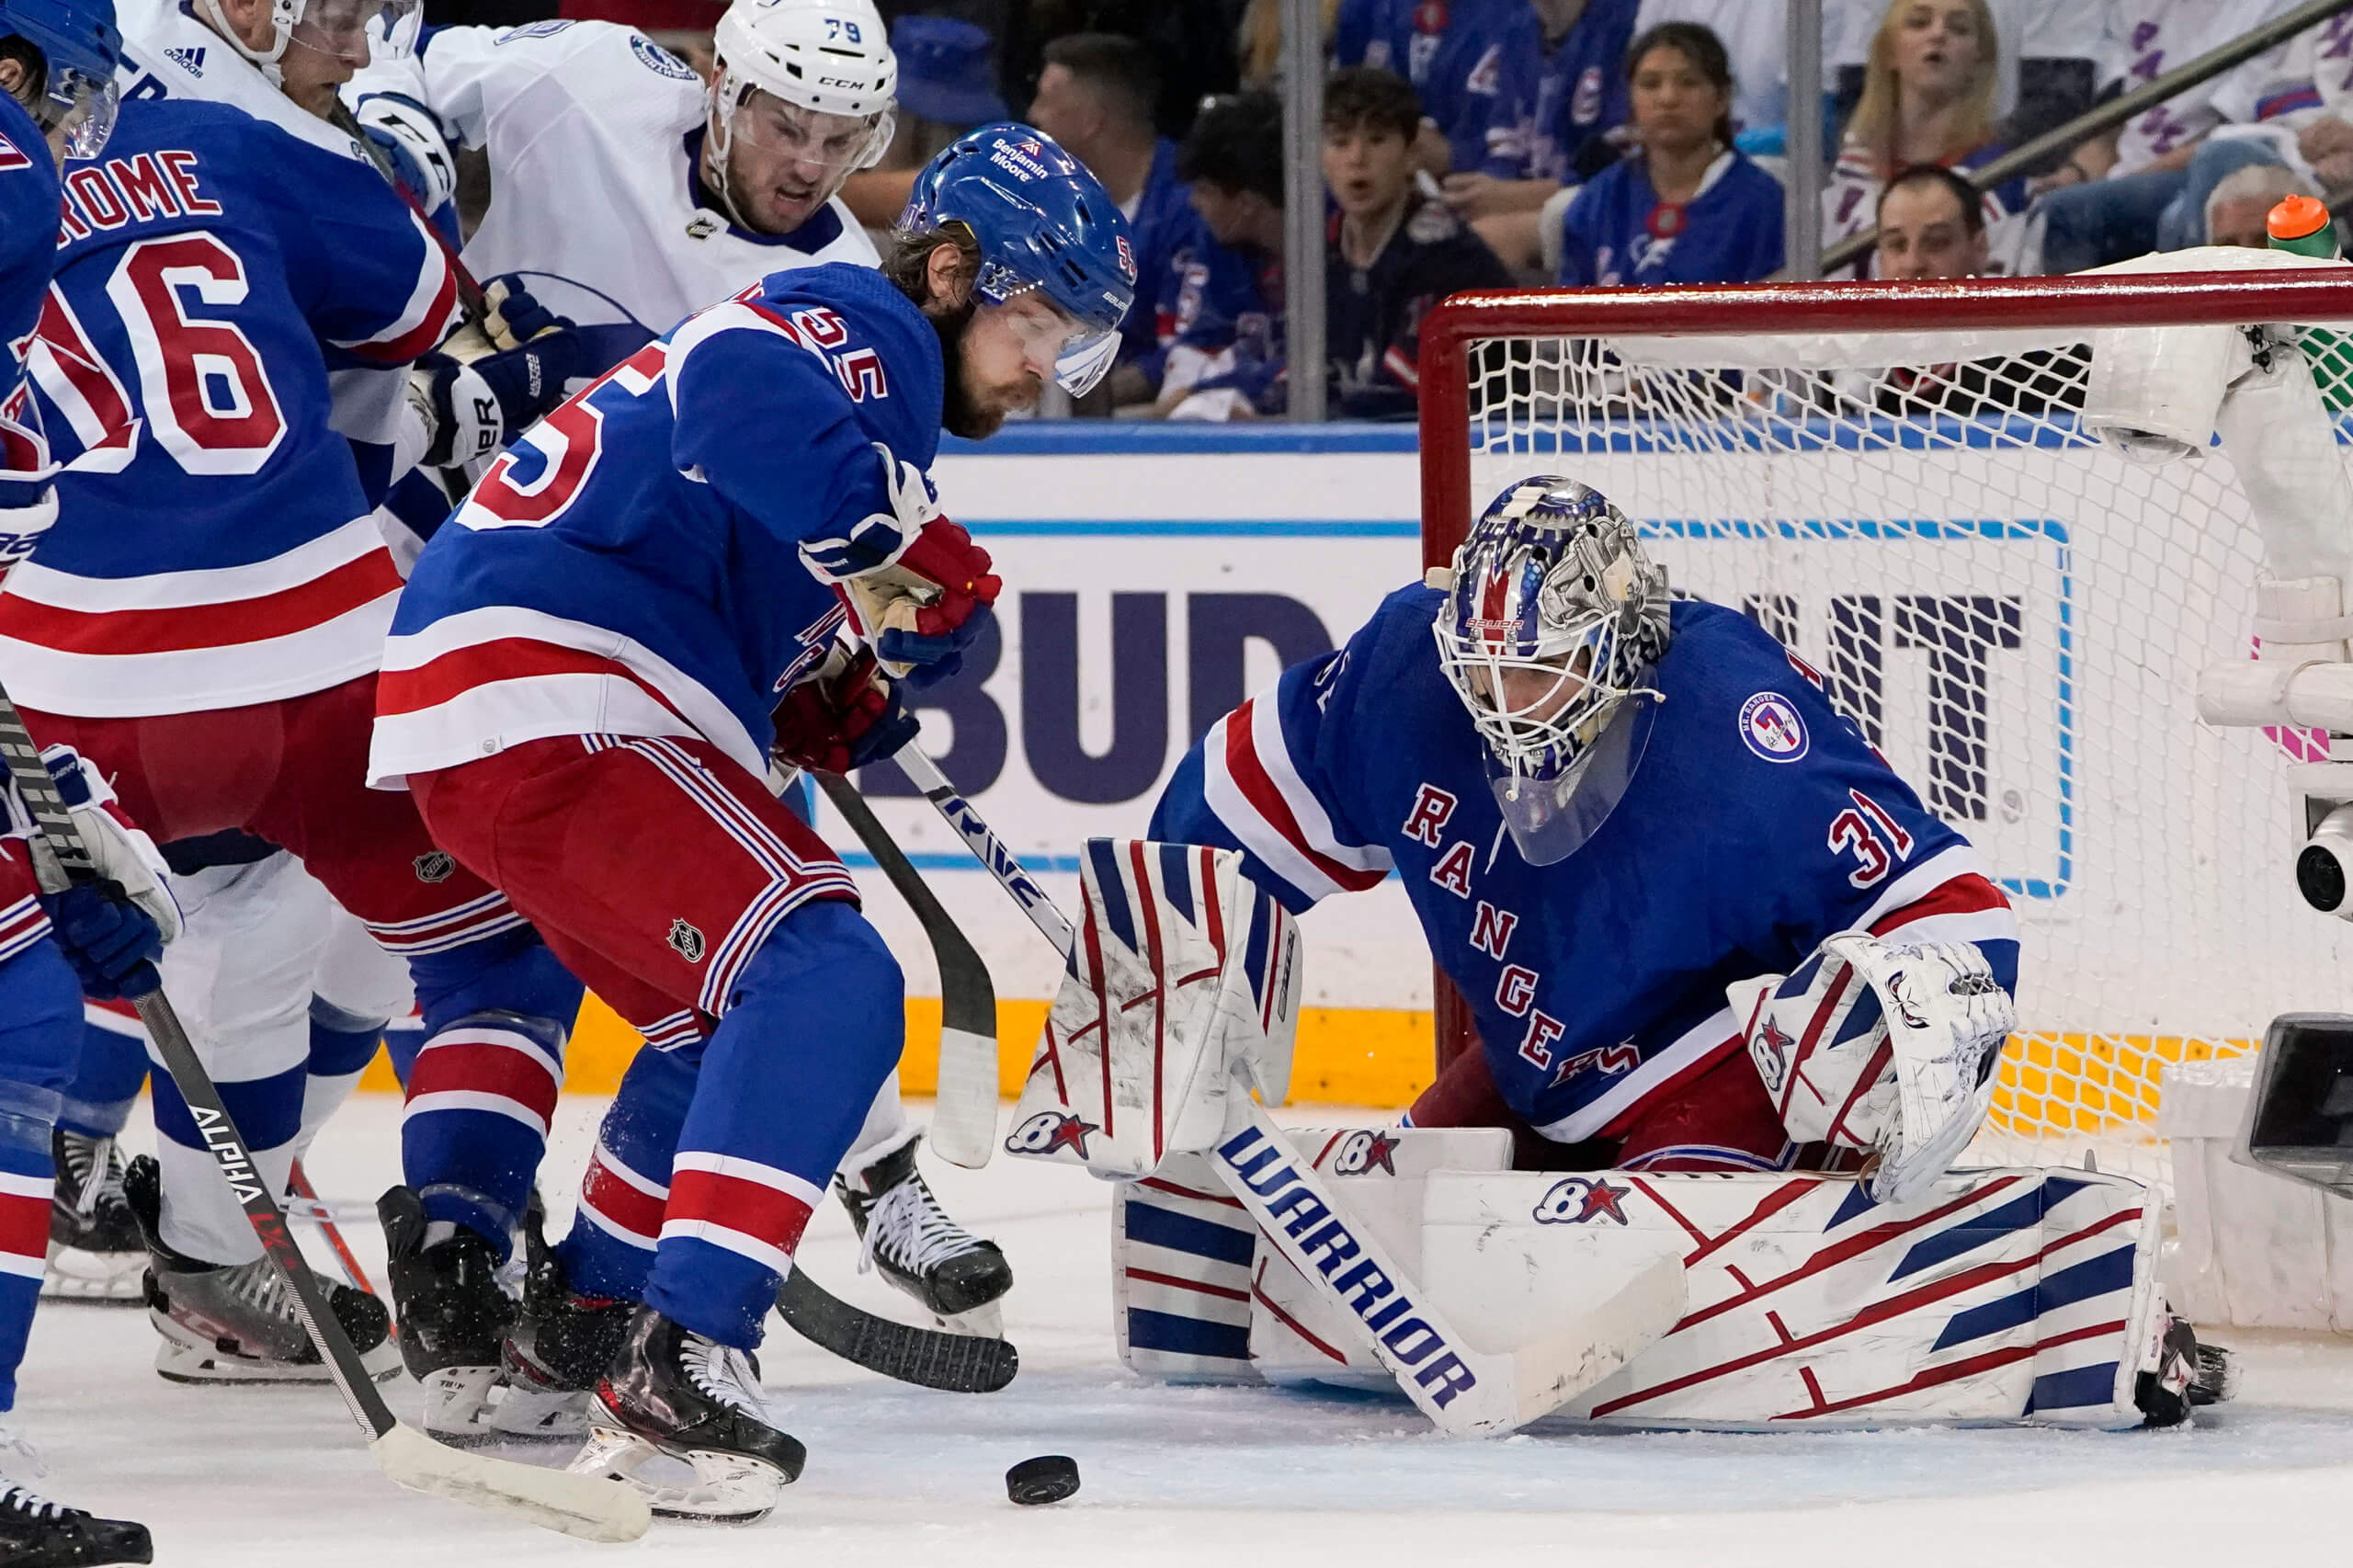 Two best goalies in the league' face off in Rangers vs. Lightning